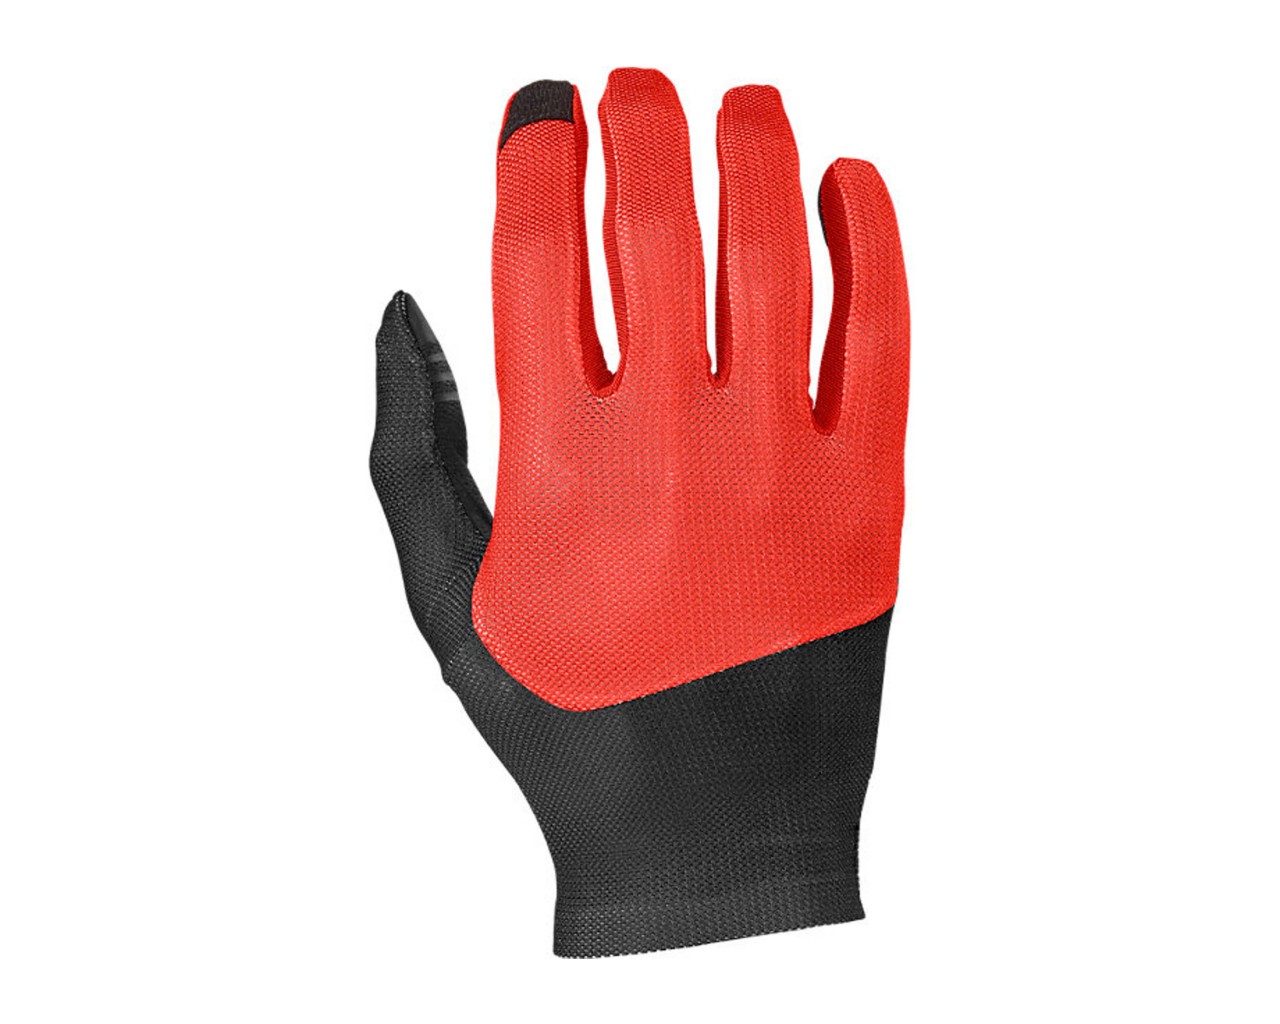 Specialized Renegade Handschuhe langfinger | flo red